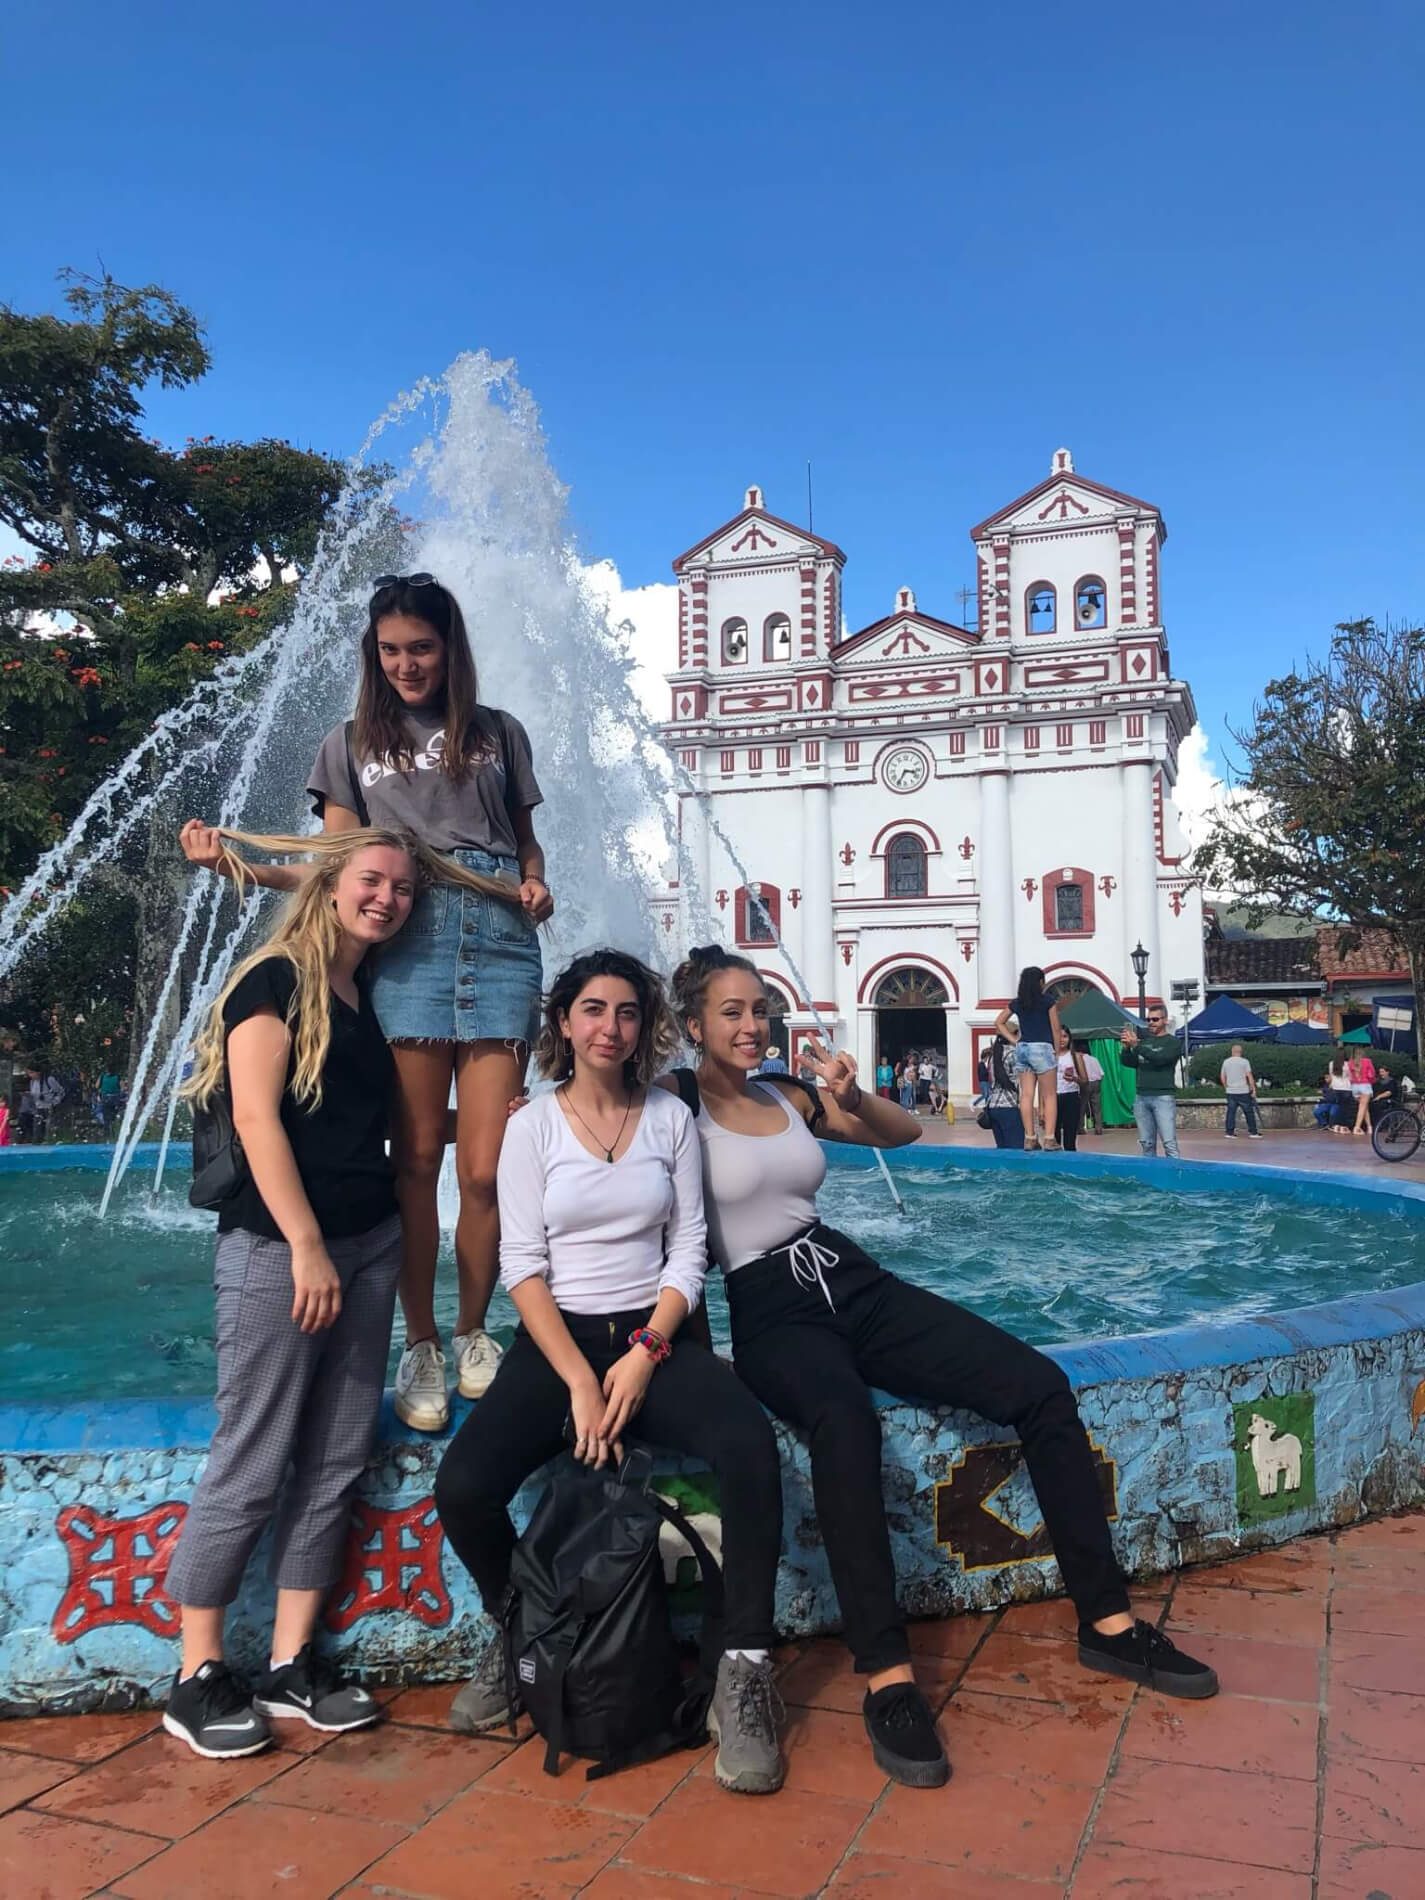 Group of friends at a fountain, tips for safe online dating and making friends online while traveling